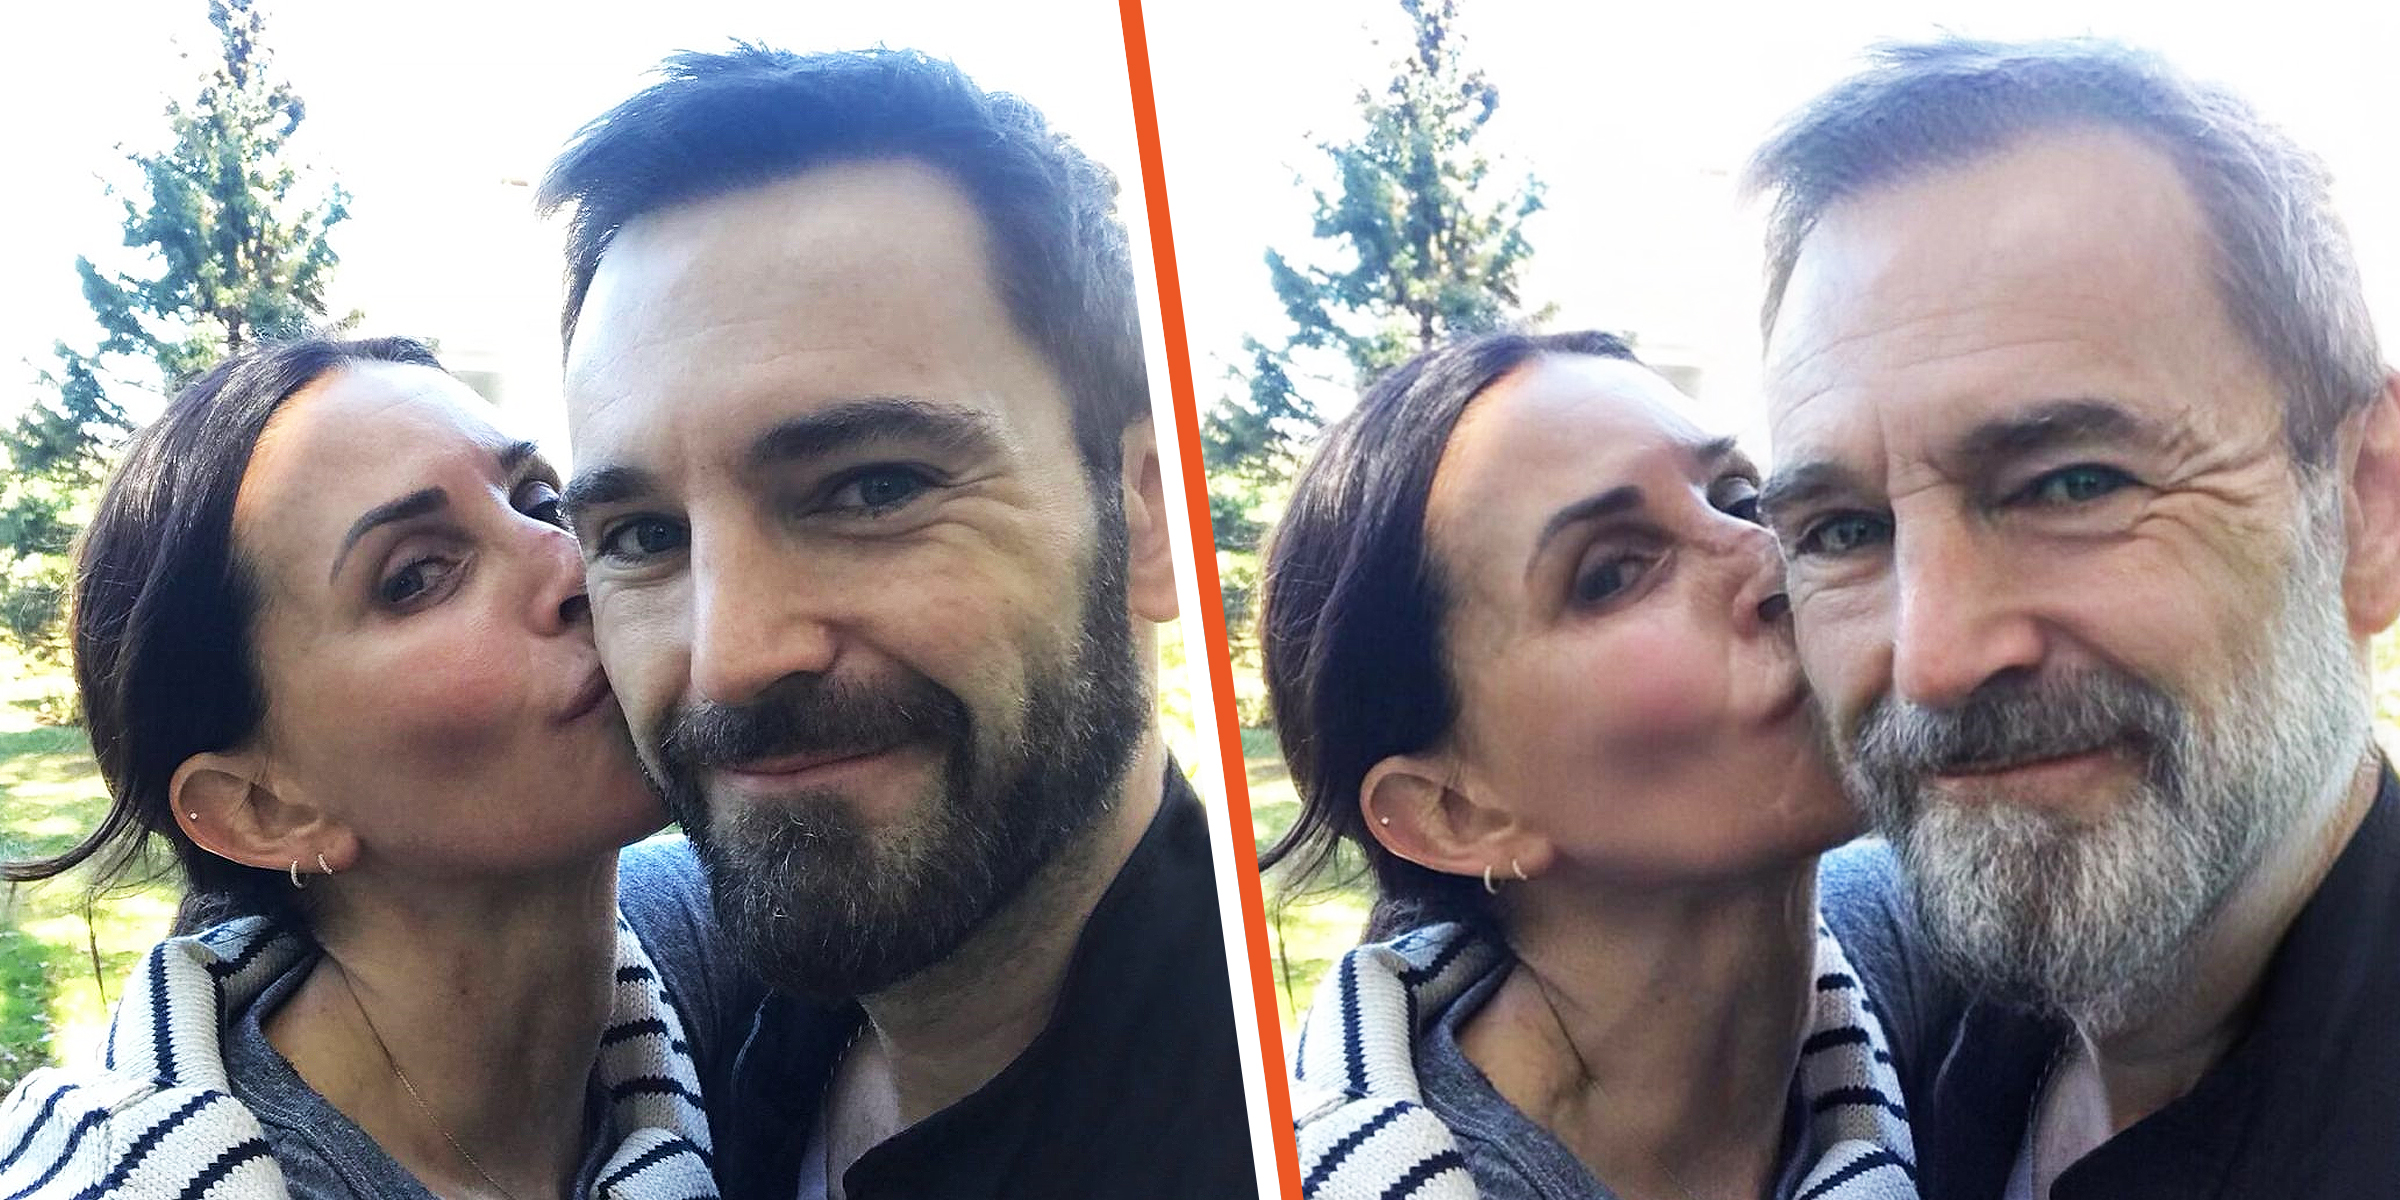 Courteney Cox and Johnny McDaid | Source: Instagram/courteneycoxofficial